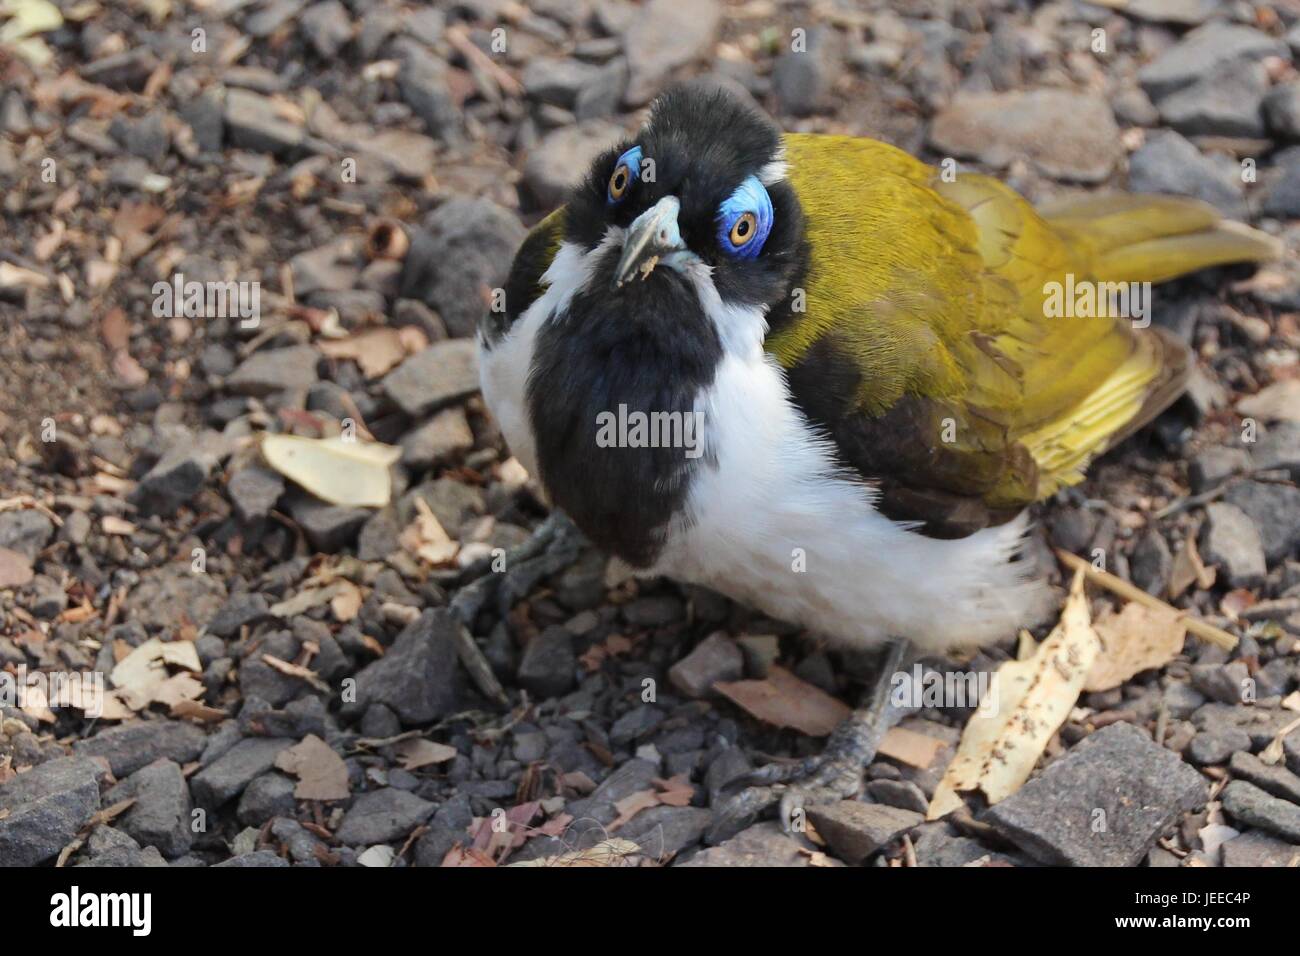 The glance of the Blue-faced honeyeater Stock Photo